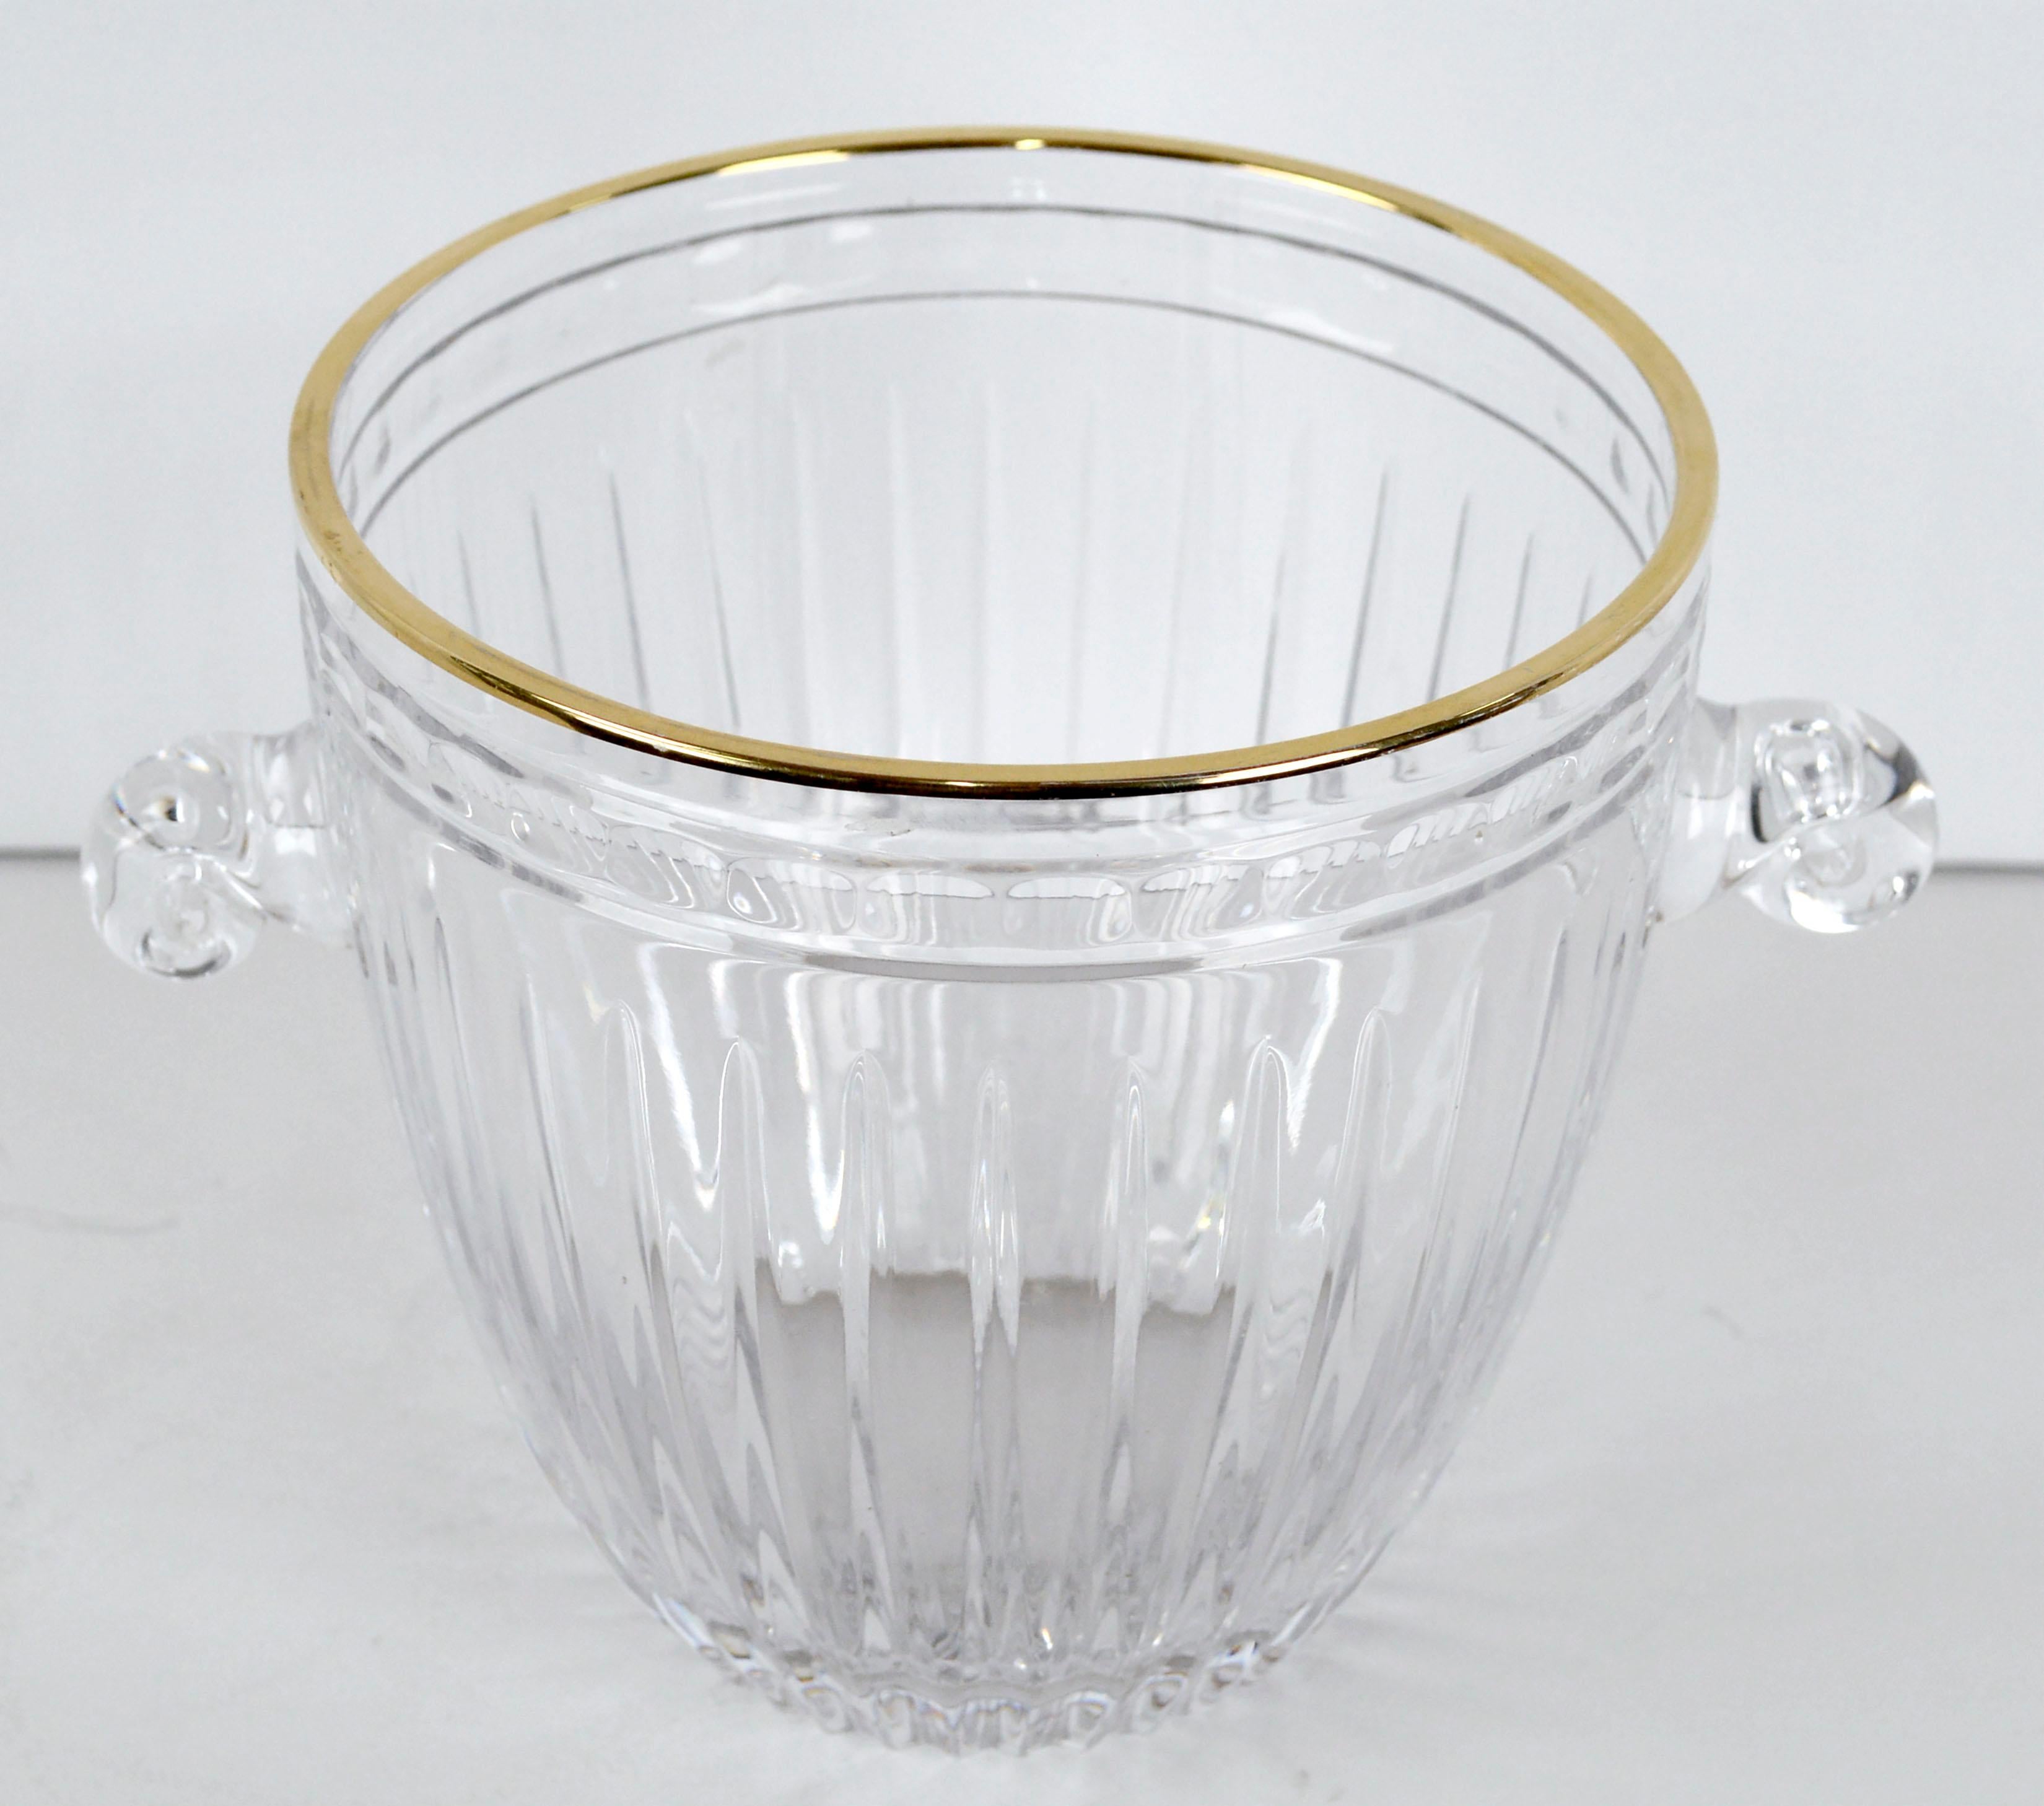 Vintage late 20th century Marquis by Waterford Crystal ice bucket wine cooler with gold trim. This elegant wine and champagne chiller features hand cut vertical details, scroll handles, and a gold rim. Marquis by Waterford logo is etched onto